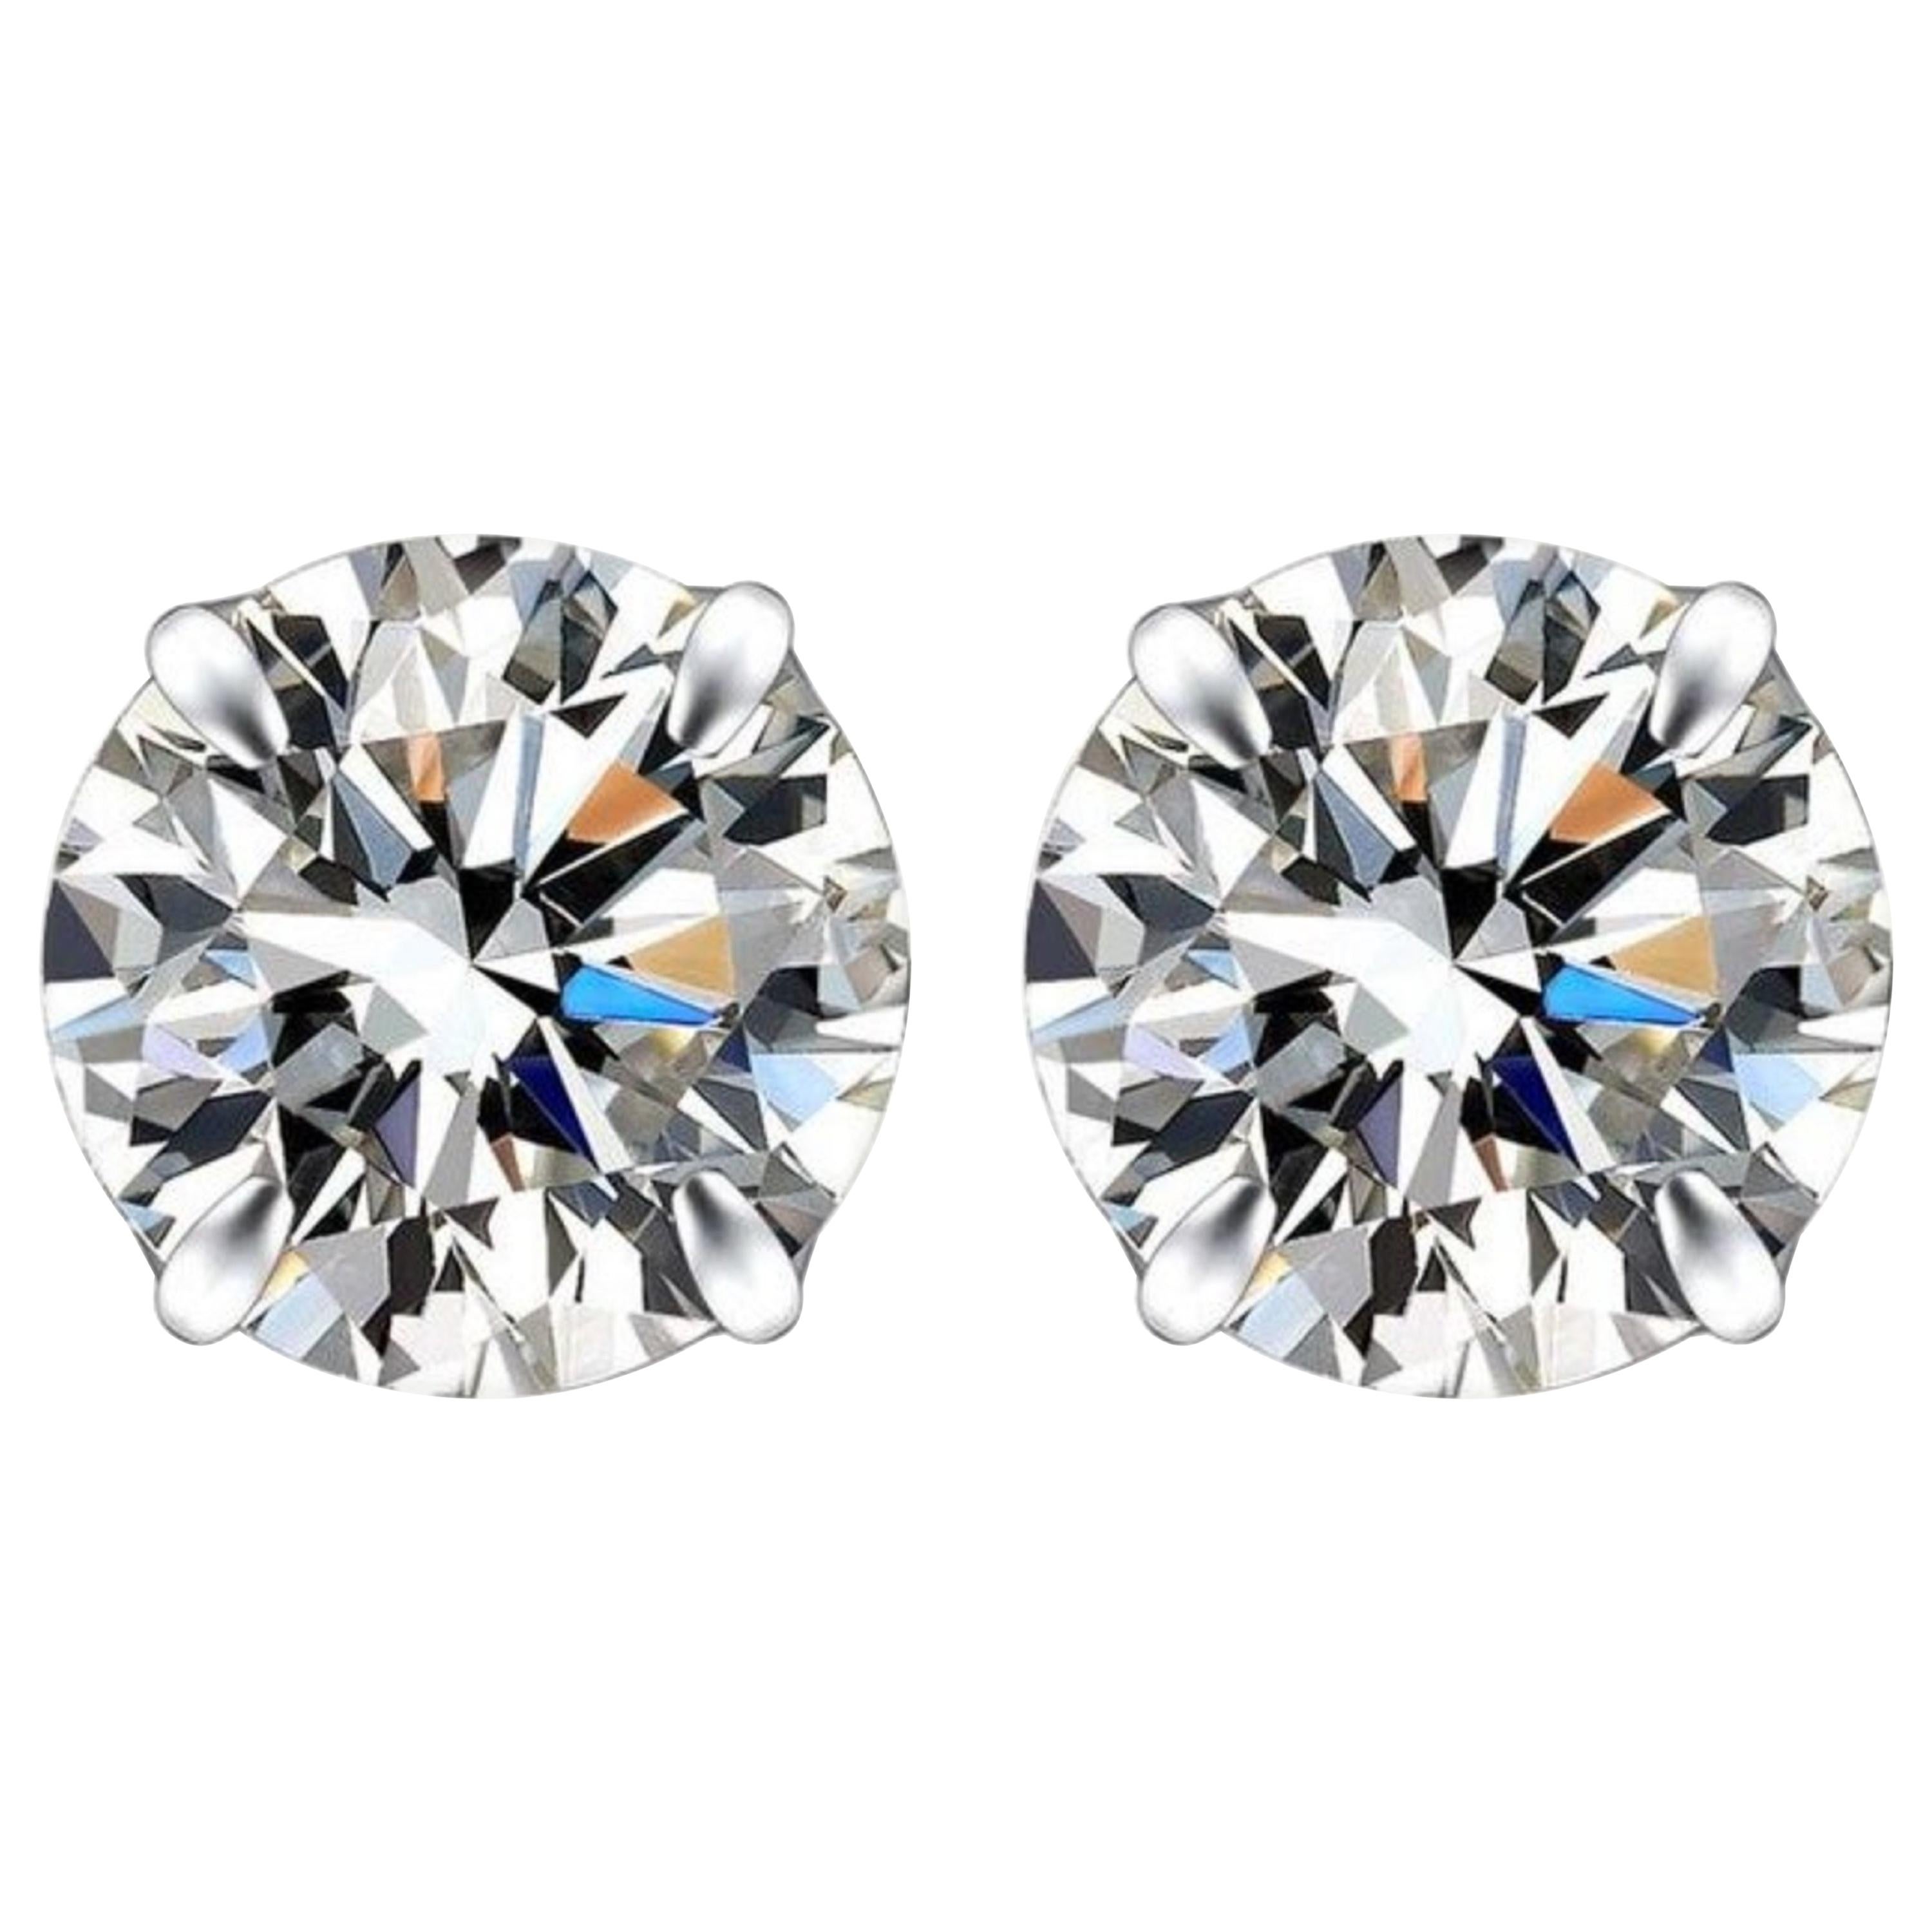 Internally Flawless F Color GIA Certified 1.60 Carat Diamond Studs 3 Excellent